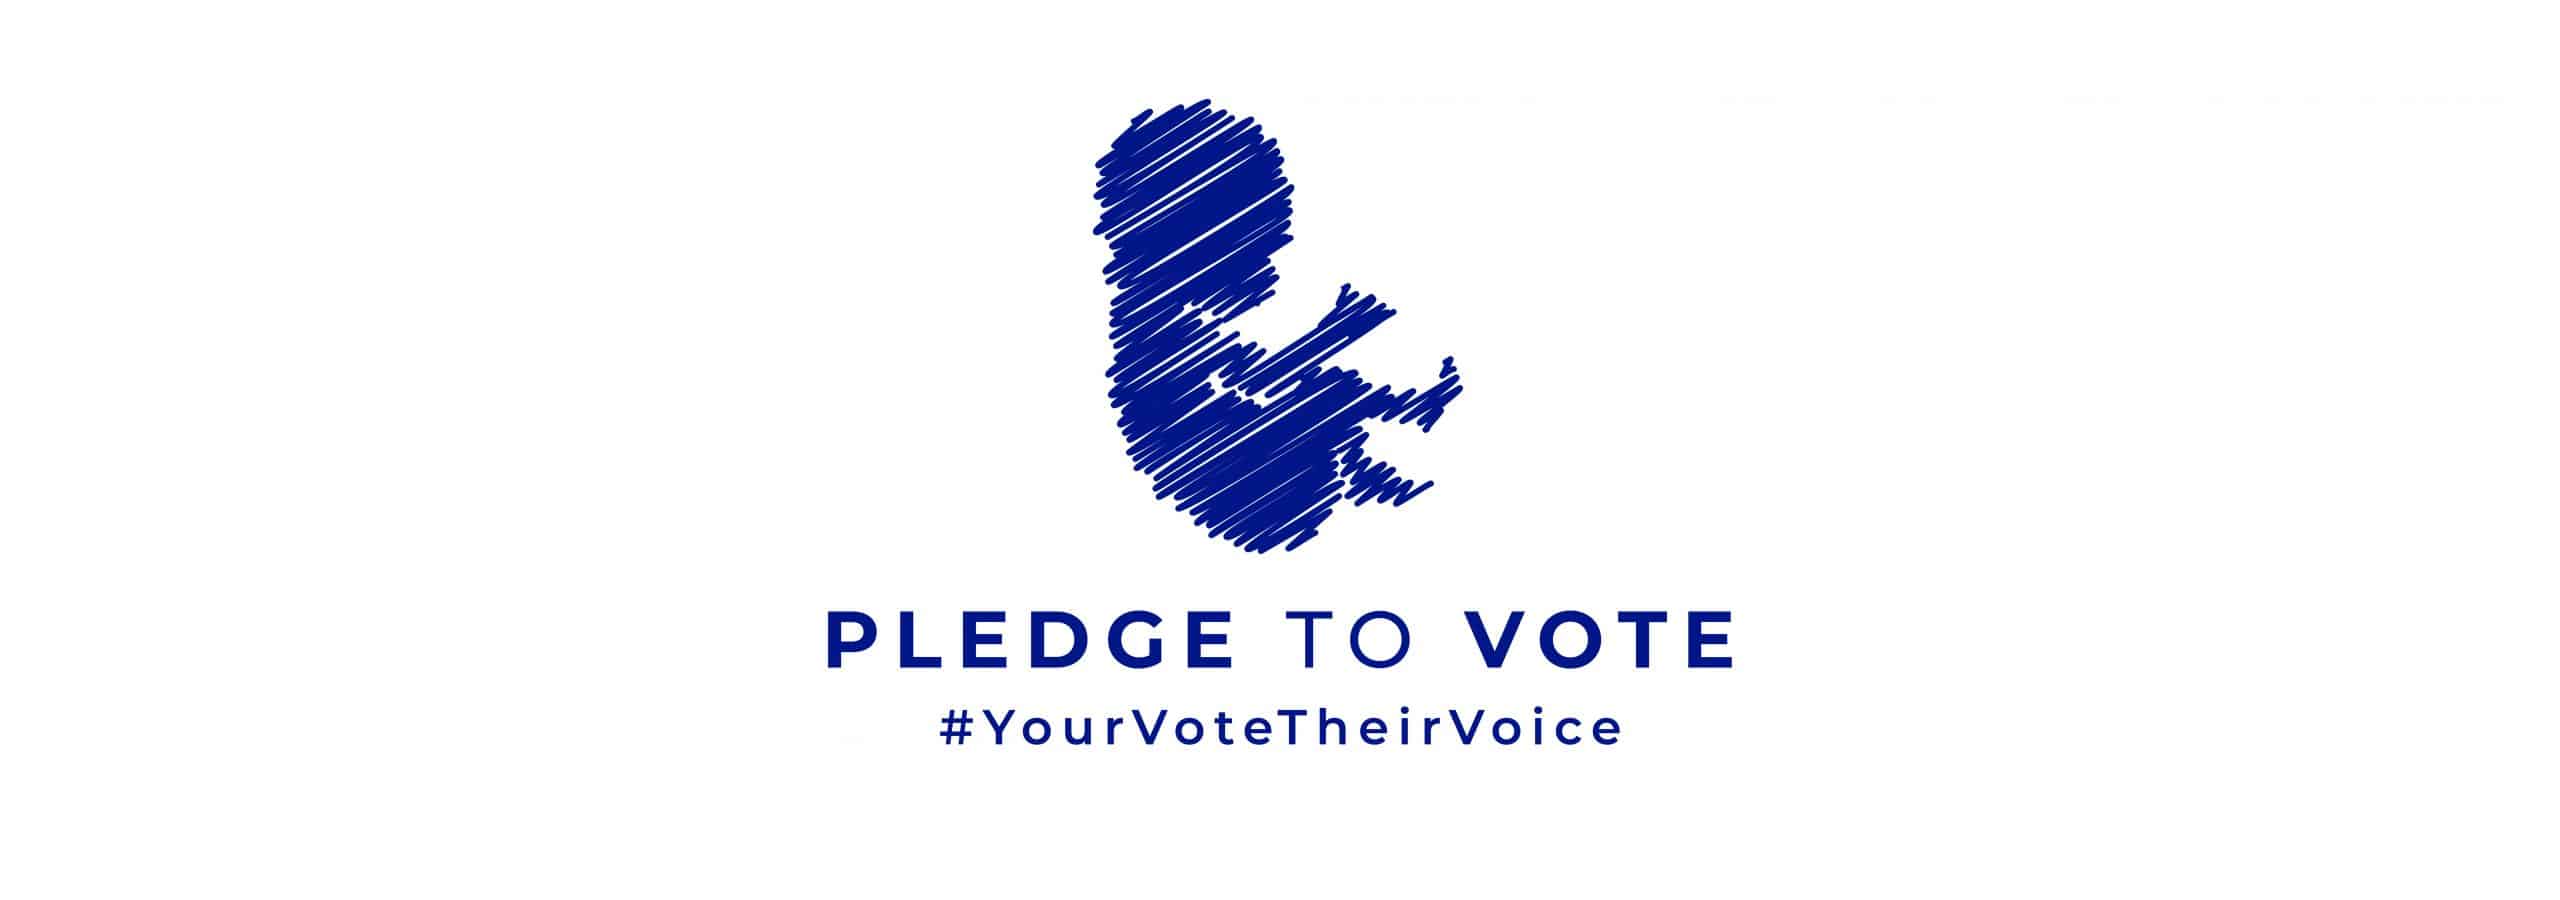 Indiana Right to Life launches #PledgeToVote campaign